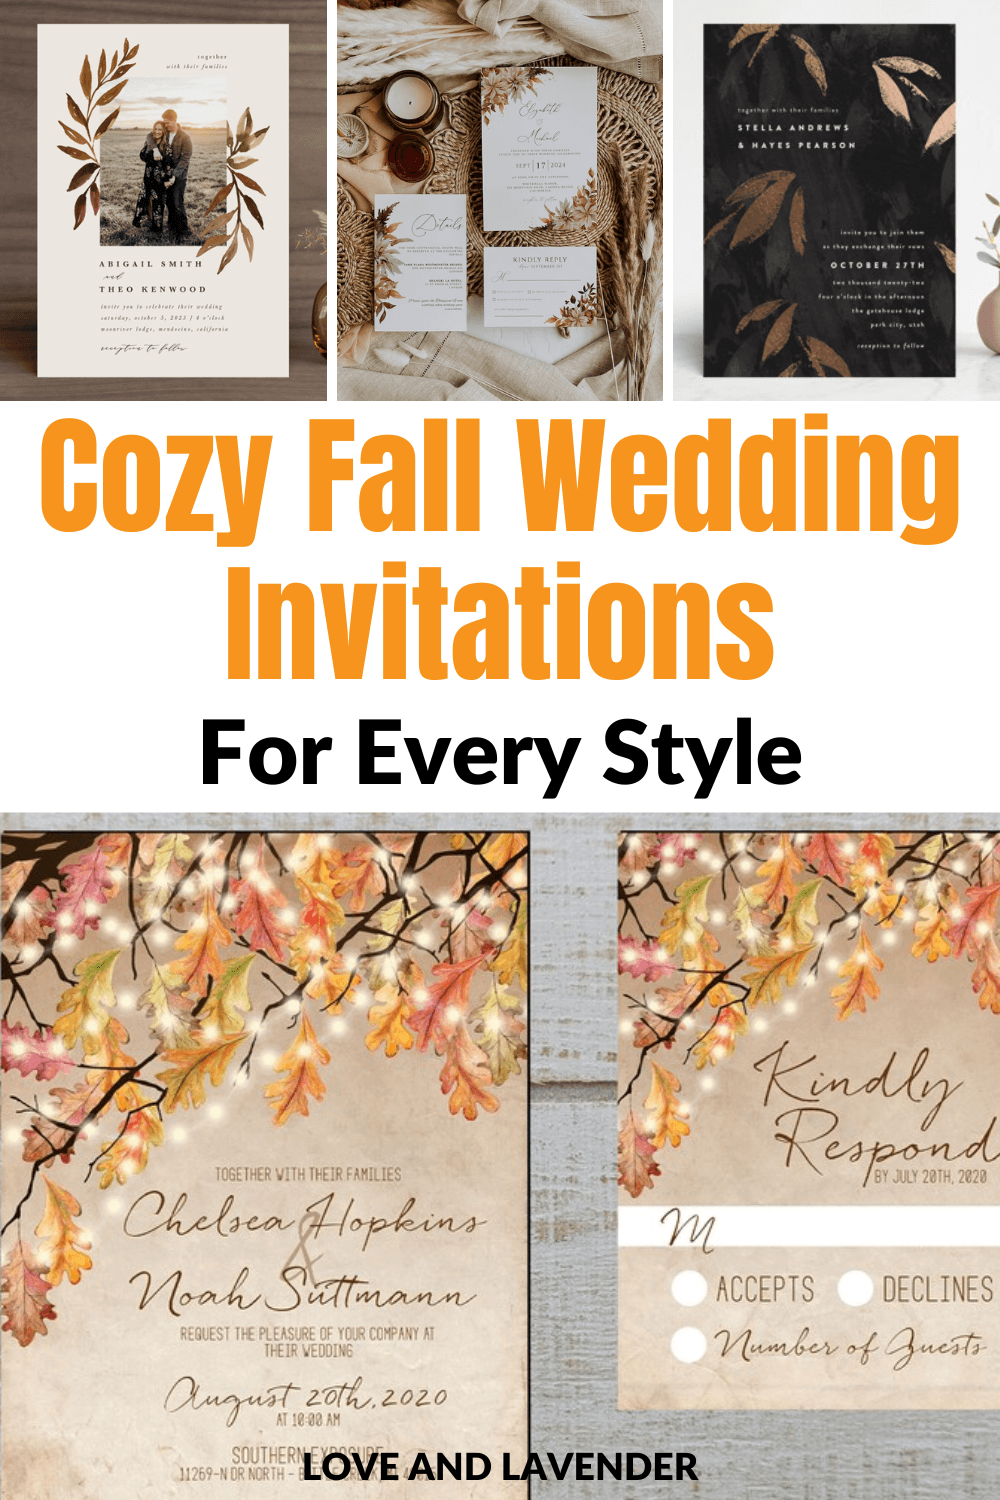 Whether you're planning a casual rustic wedding or an elegant styled ceremony, we have a number of fall wedding invitations perfect for you and your partner's big day.